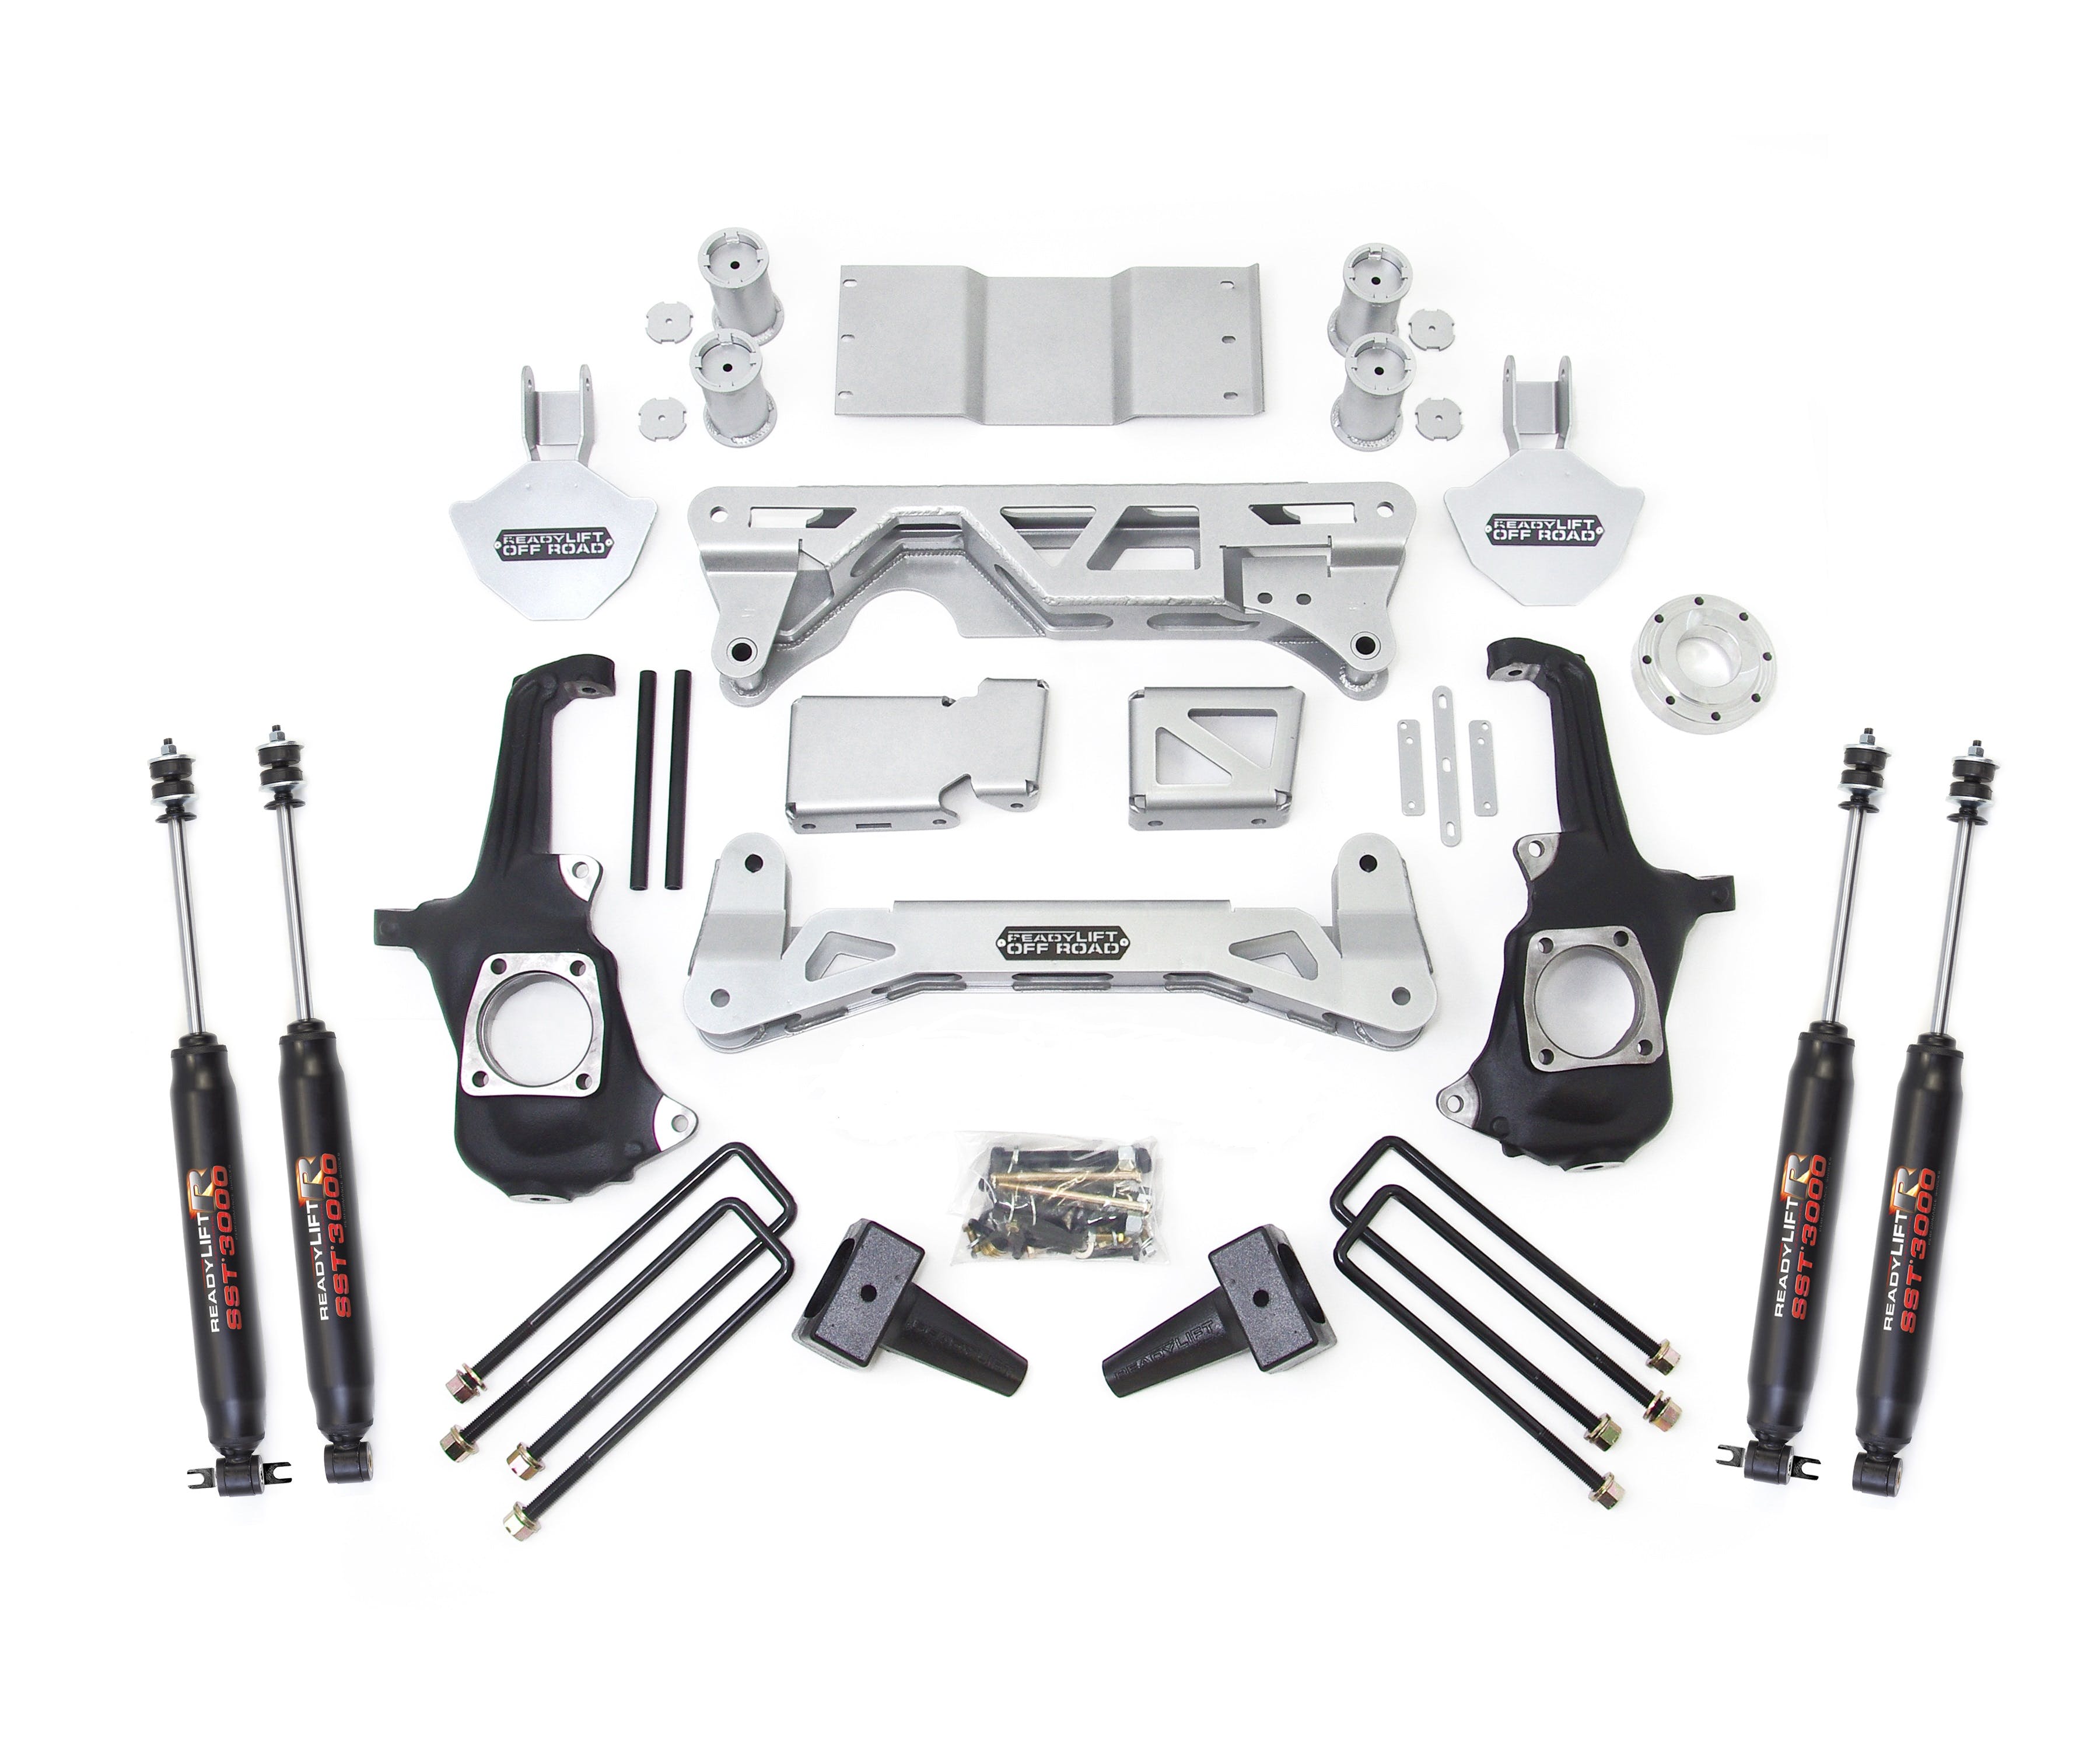 ReadyLIFT 44-3050 5-6" Suspension Lift Kit with SST3000 Shocks